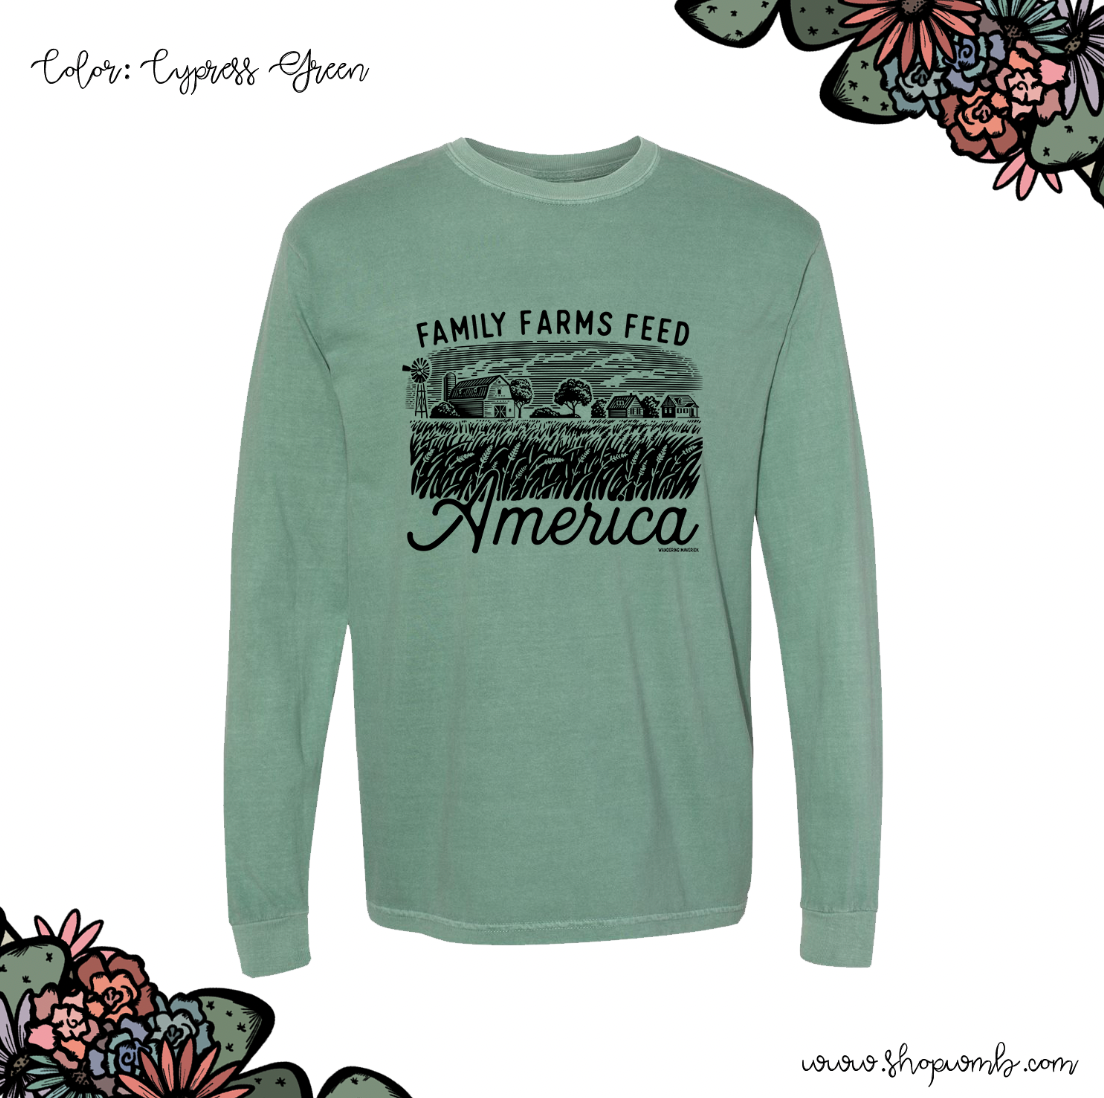 Family Farms Feed America LONG SLEEVE T-Shirt (S-3XL) - Multiple Colors!